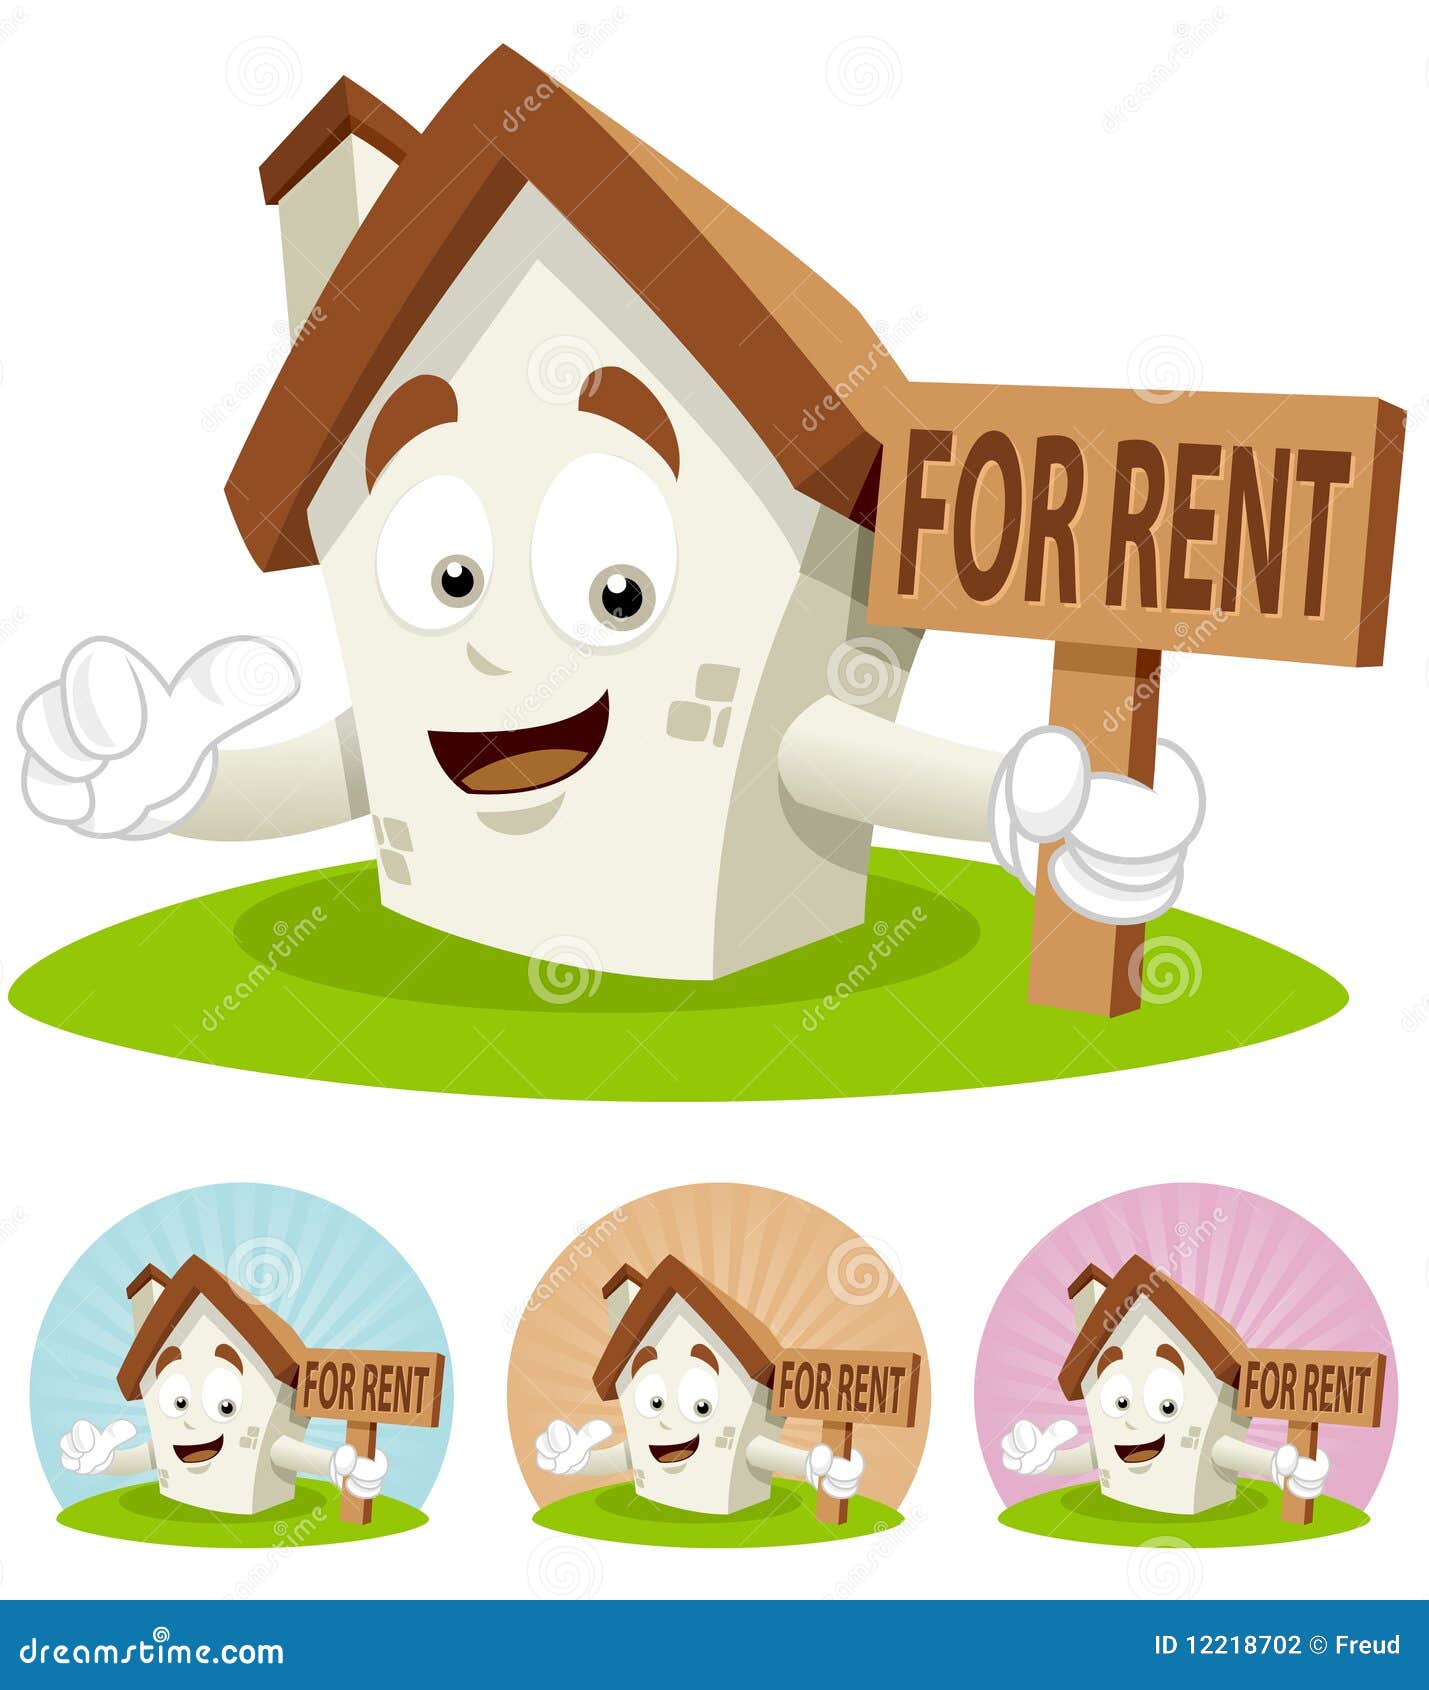 house for rent clipart - photo #44